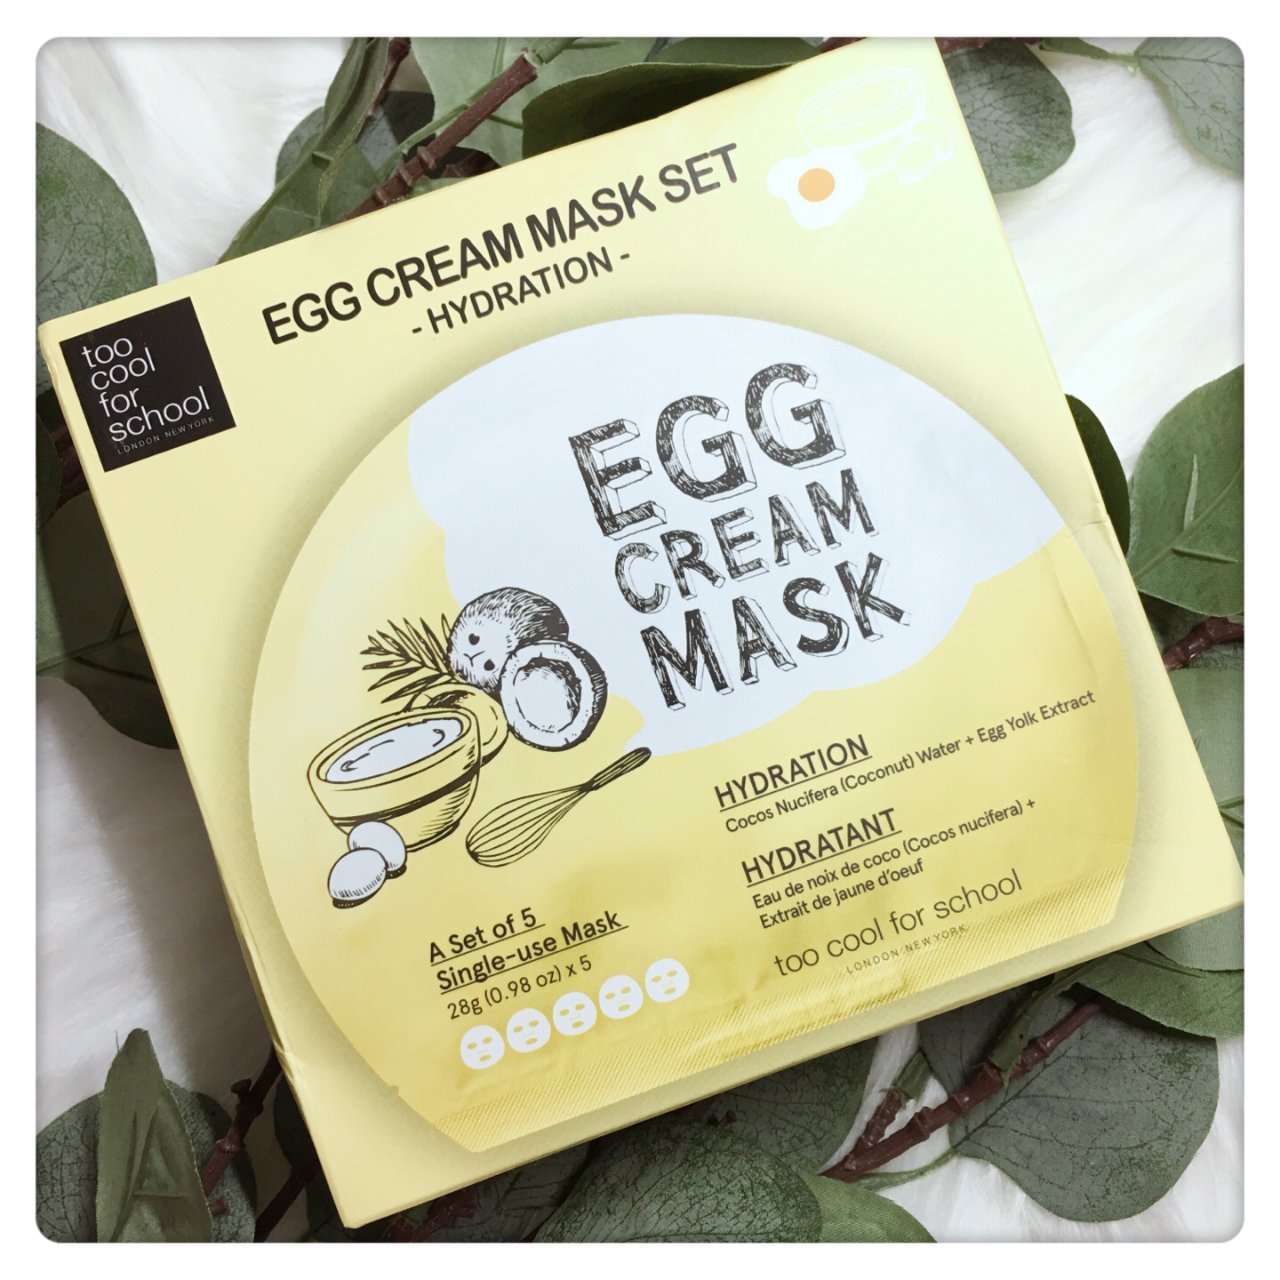 Too cool for school,egg cream mask